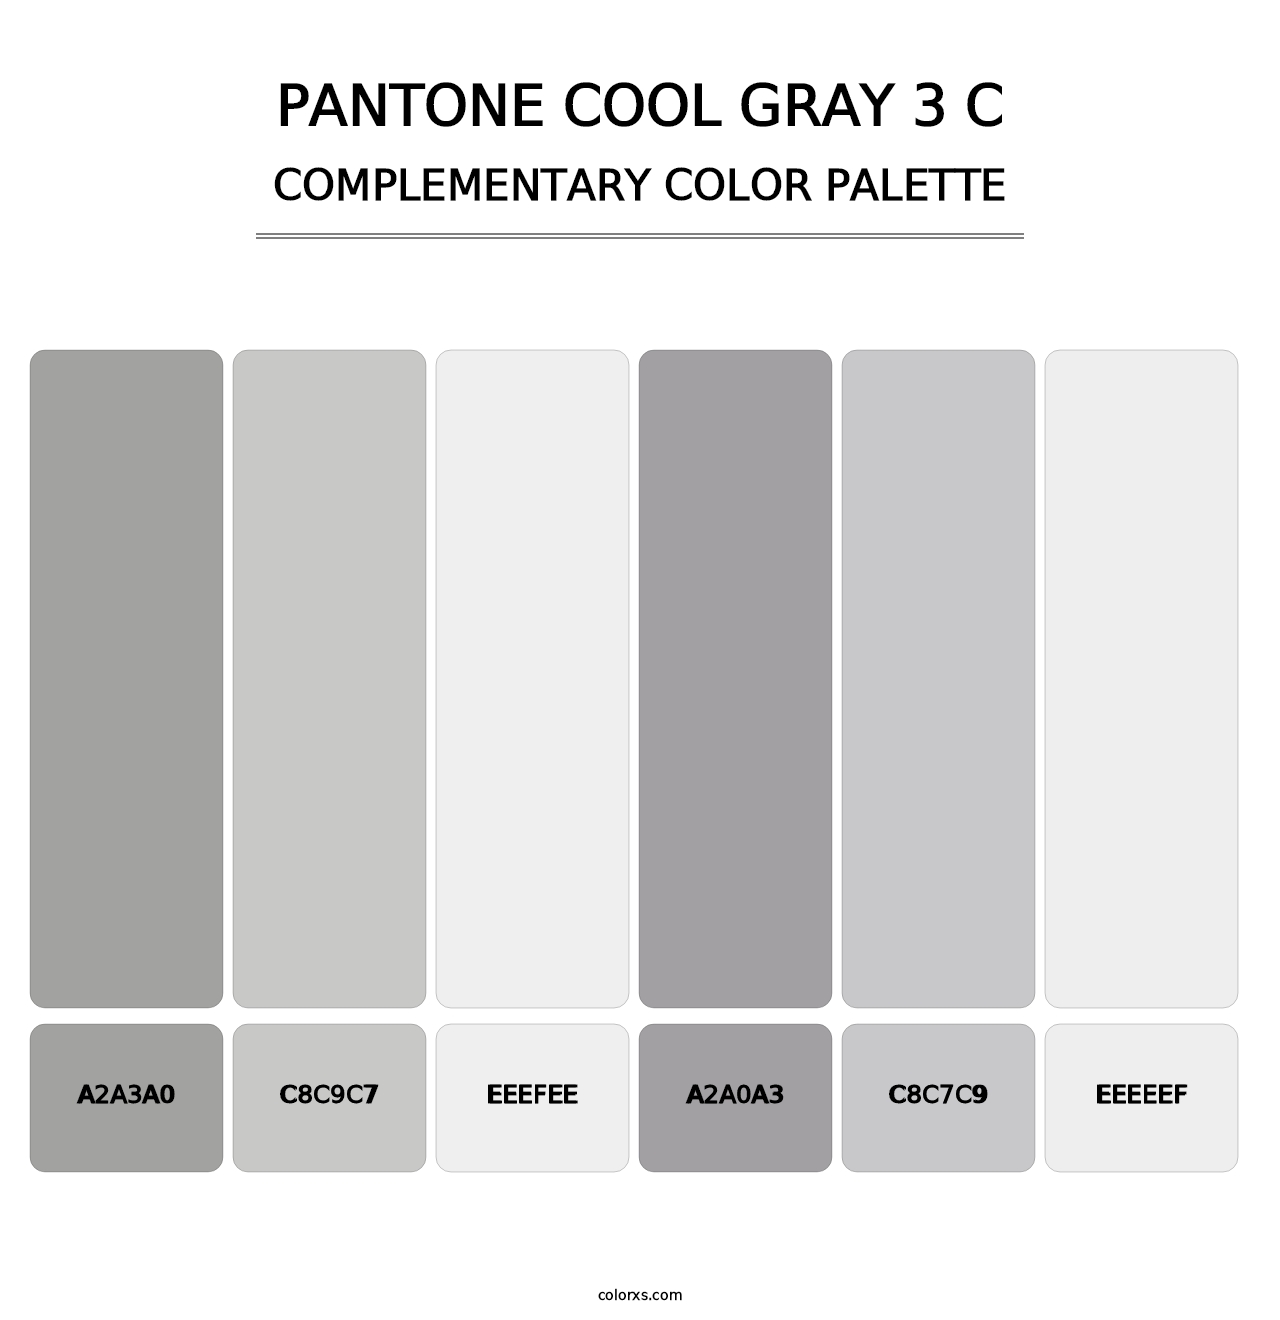 PANTONE Cool Gray 3 C - Complementary Color Palette